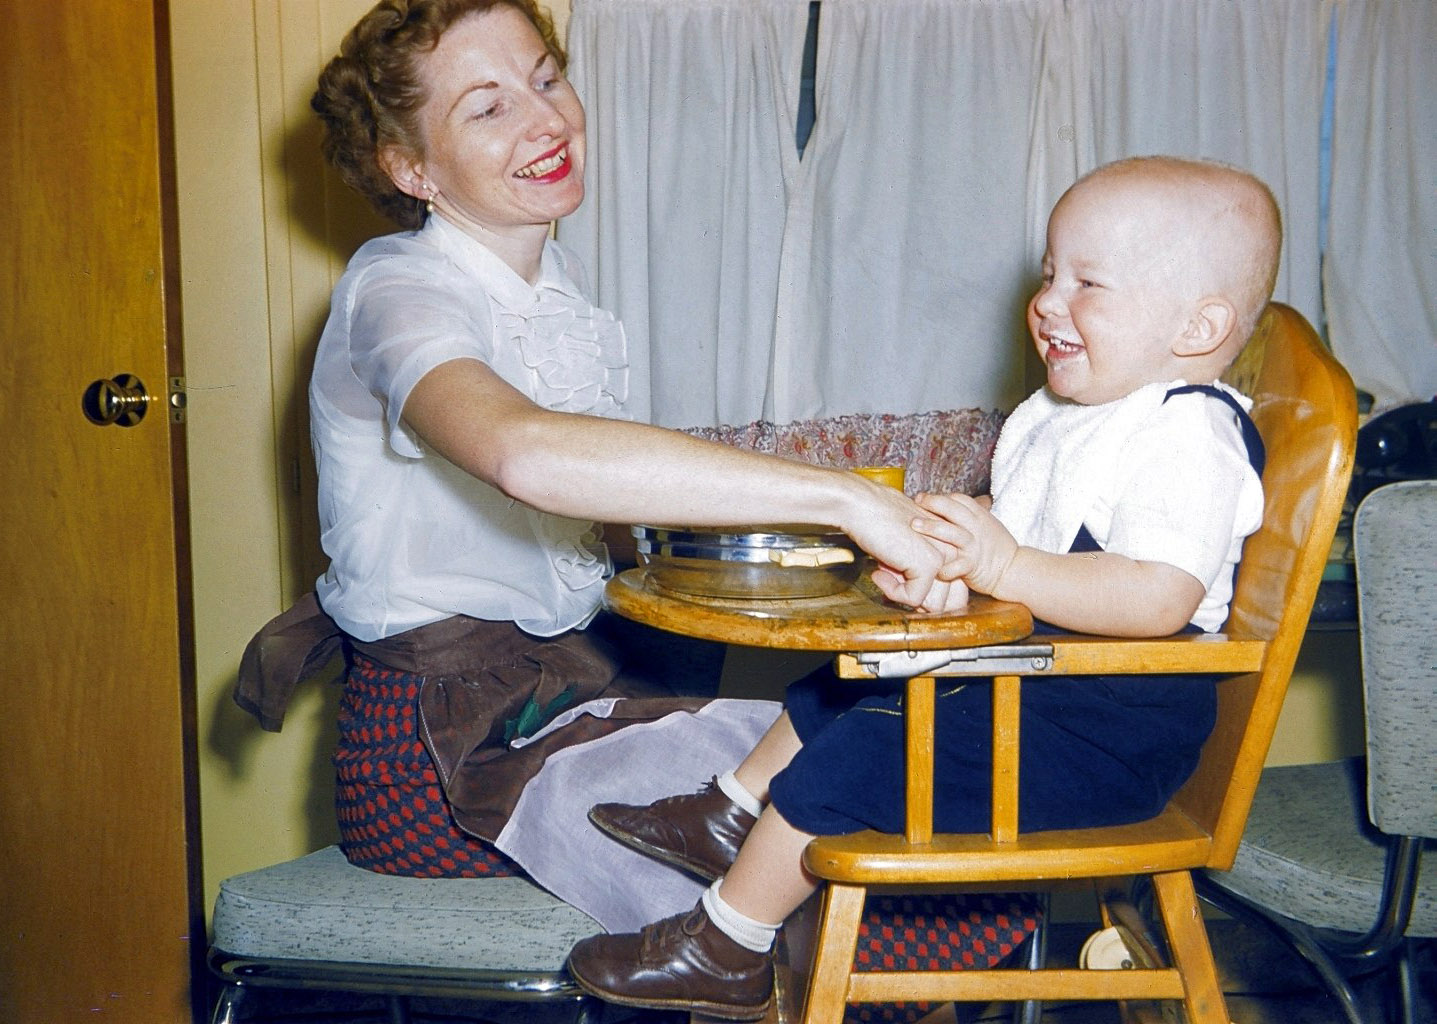 This is my first picture here at Shorpy. What a great place. This is not posed. It looks like a baby food ad, but my Dad caught us in a great moment. My beloved Mom and me in 1956 in our home in West Covina, California. We lived there until I was 9. Mom is still with us at age 83. View full size.